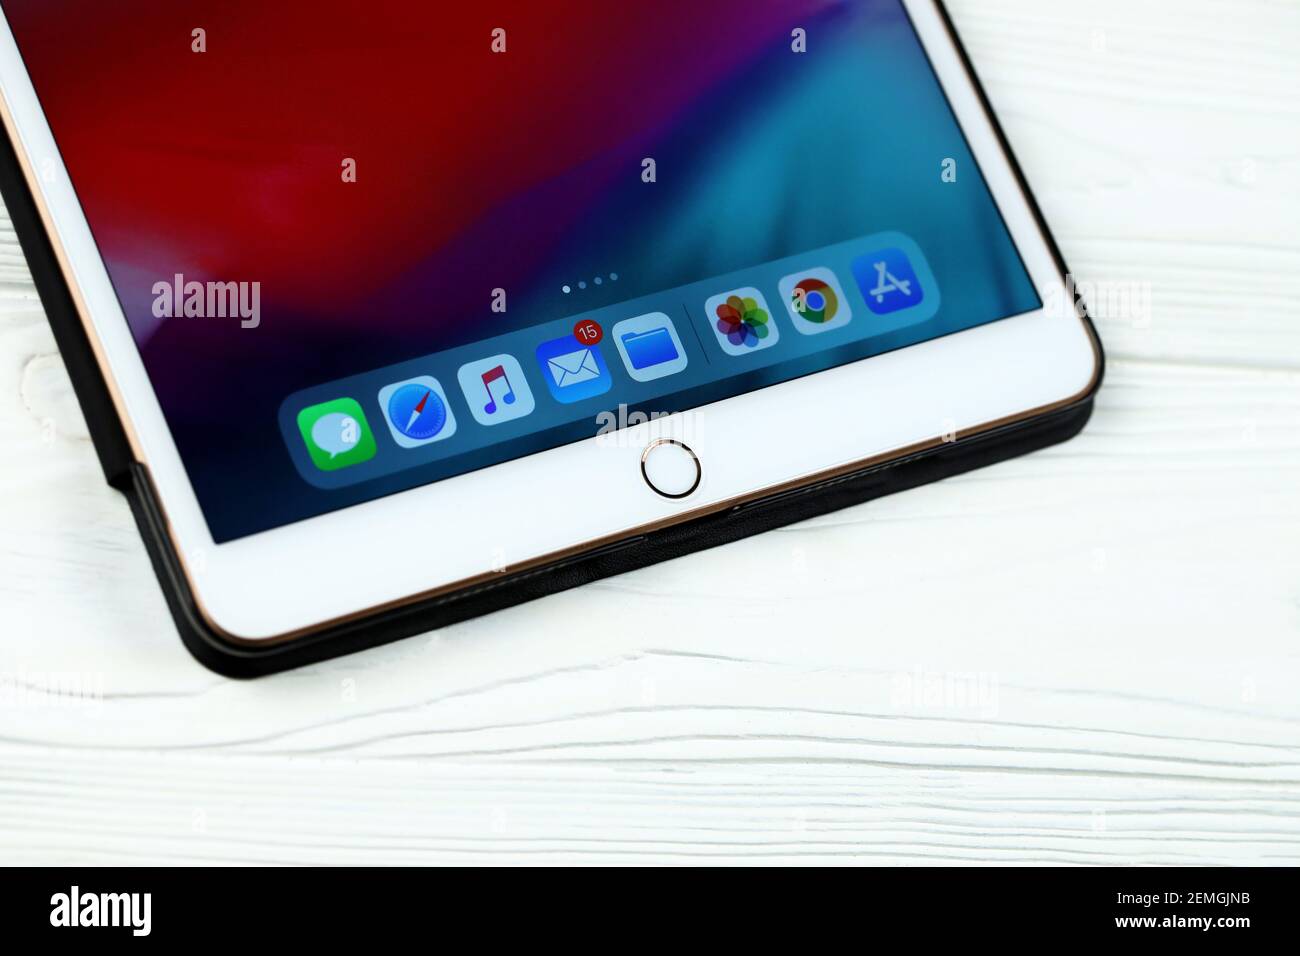 KHARKOV, UKRAINE - FEBRUARY 14, 2021: iPad Air 2 with IOS icons on display lies on white wooden table Stock Photo